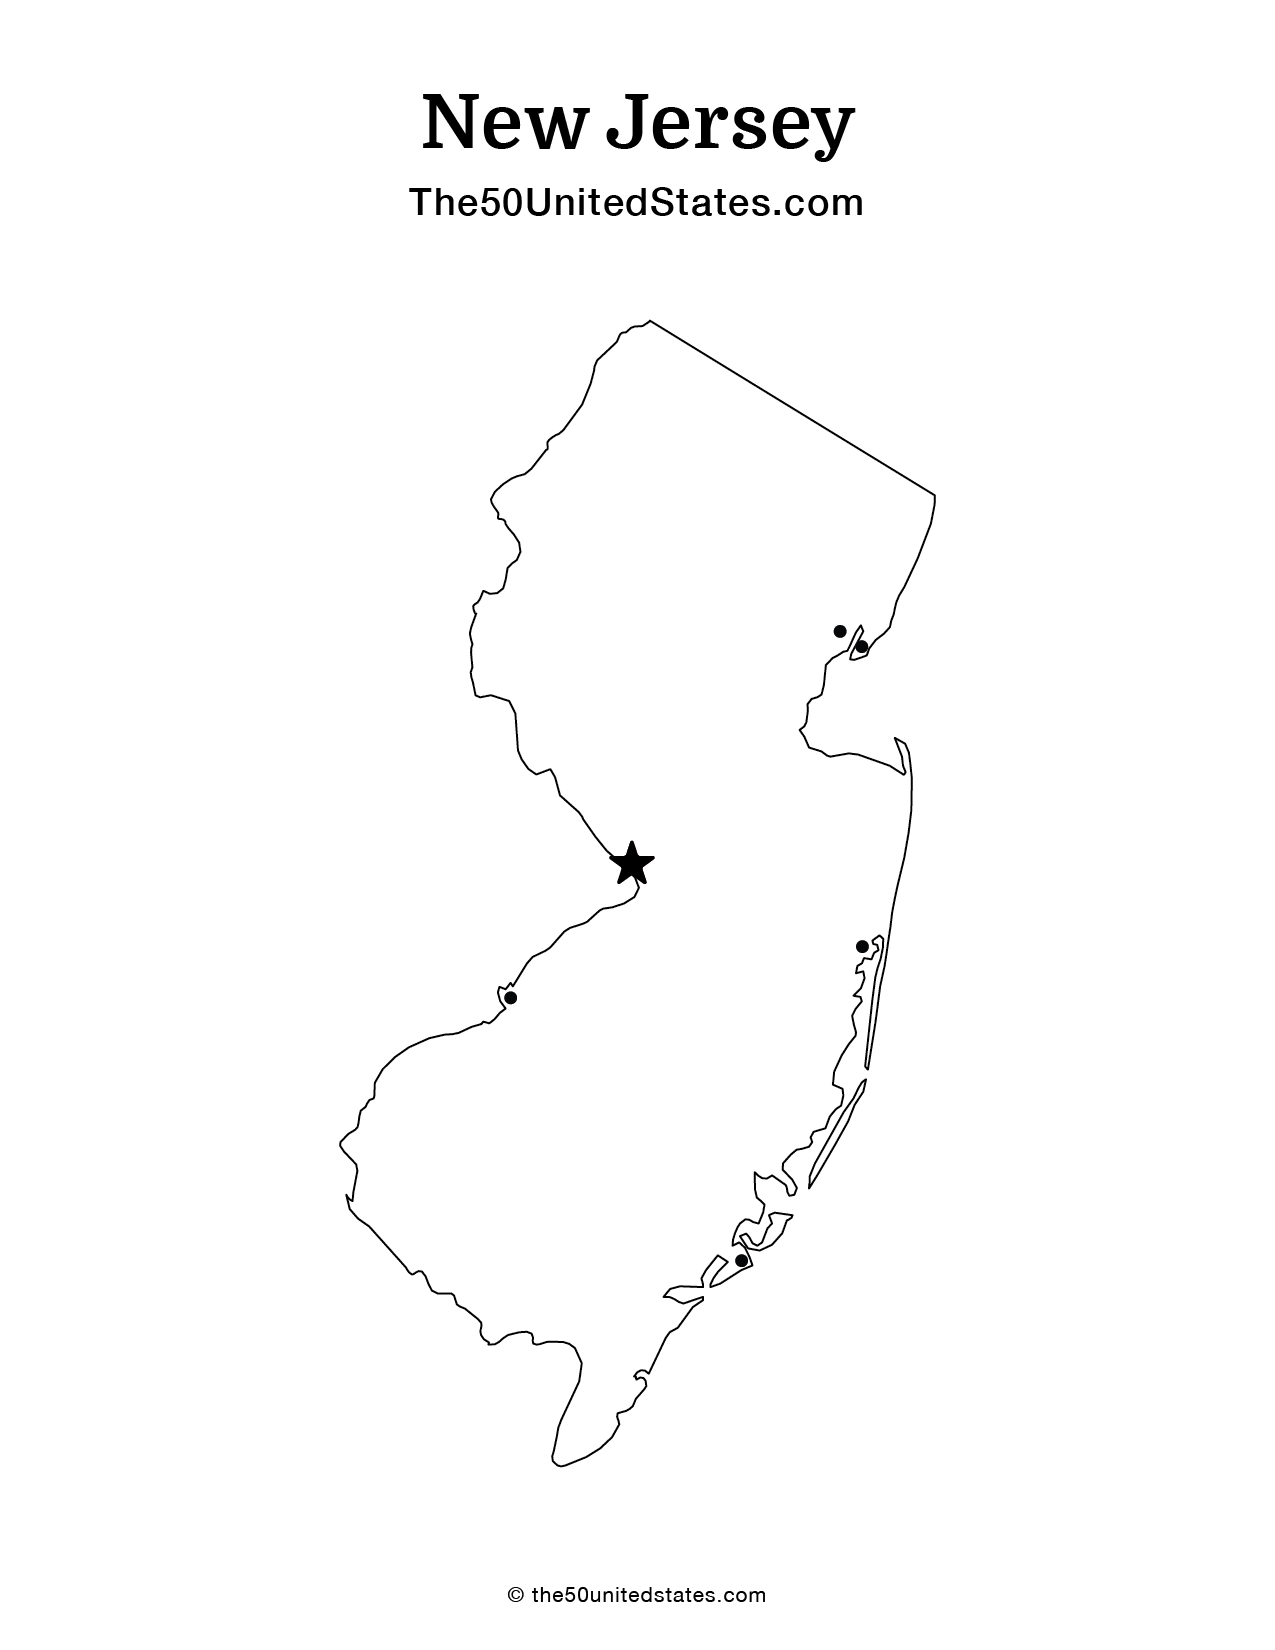 New Jersey with Cities (Blank)